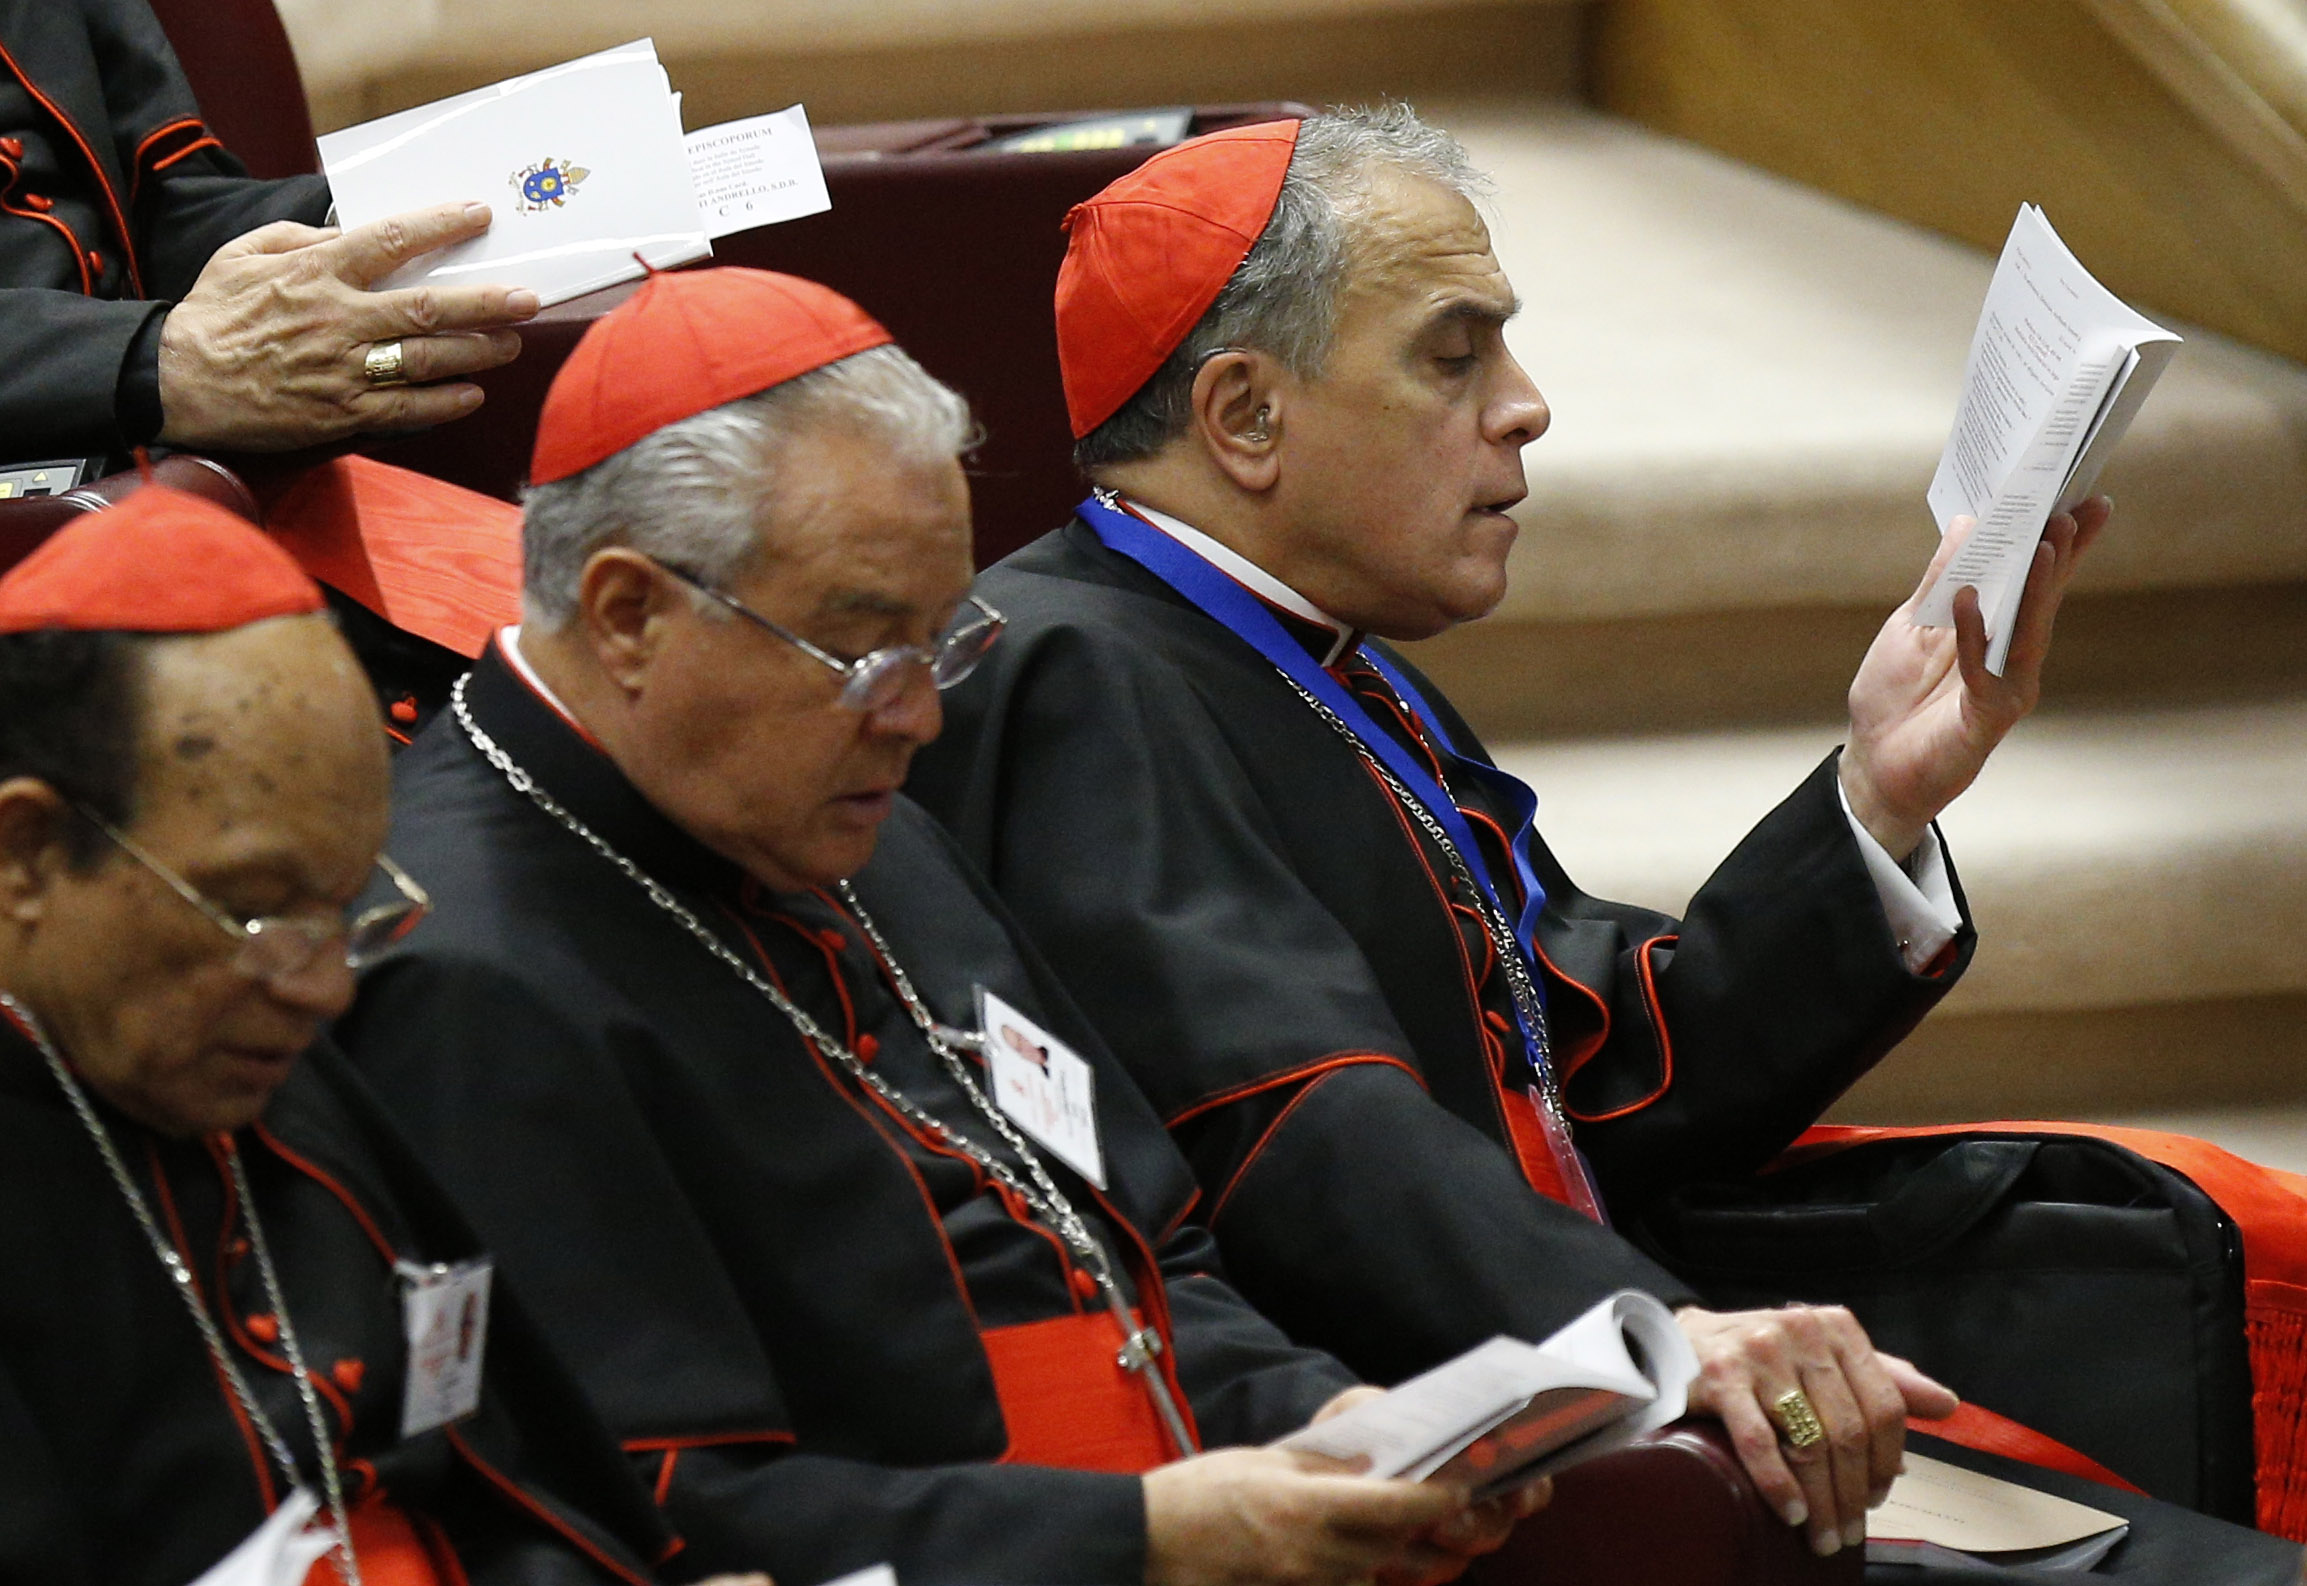 All US bishops ordered not to destroy documents